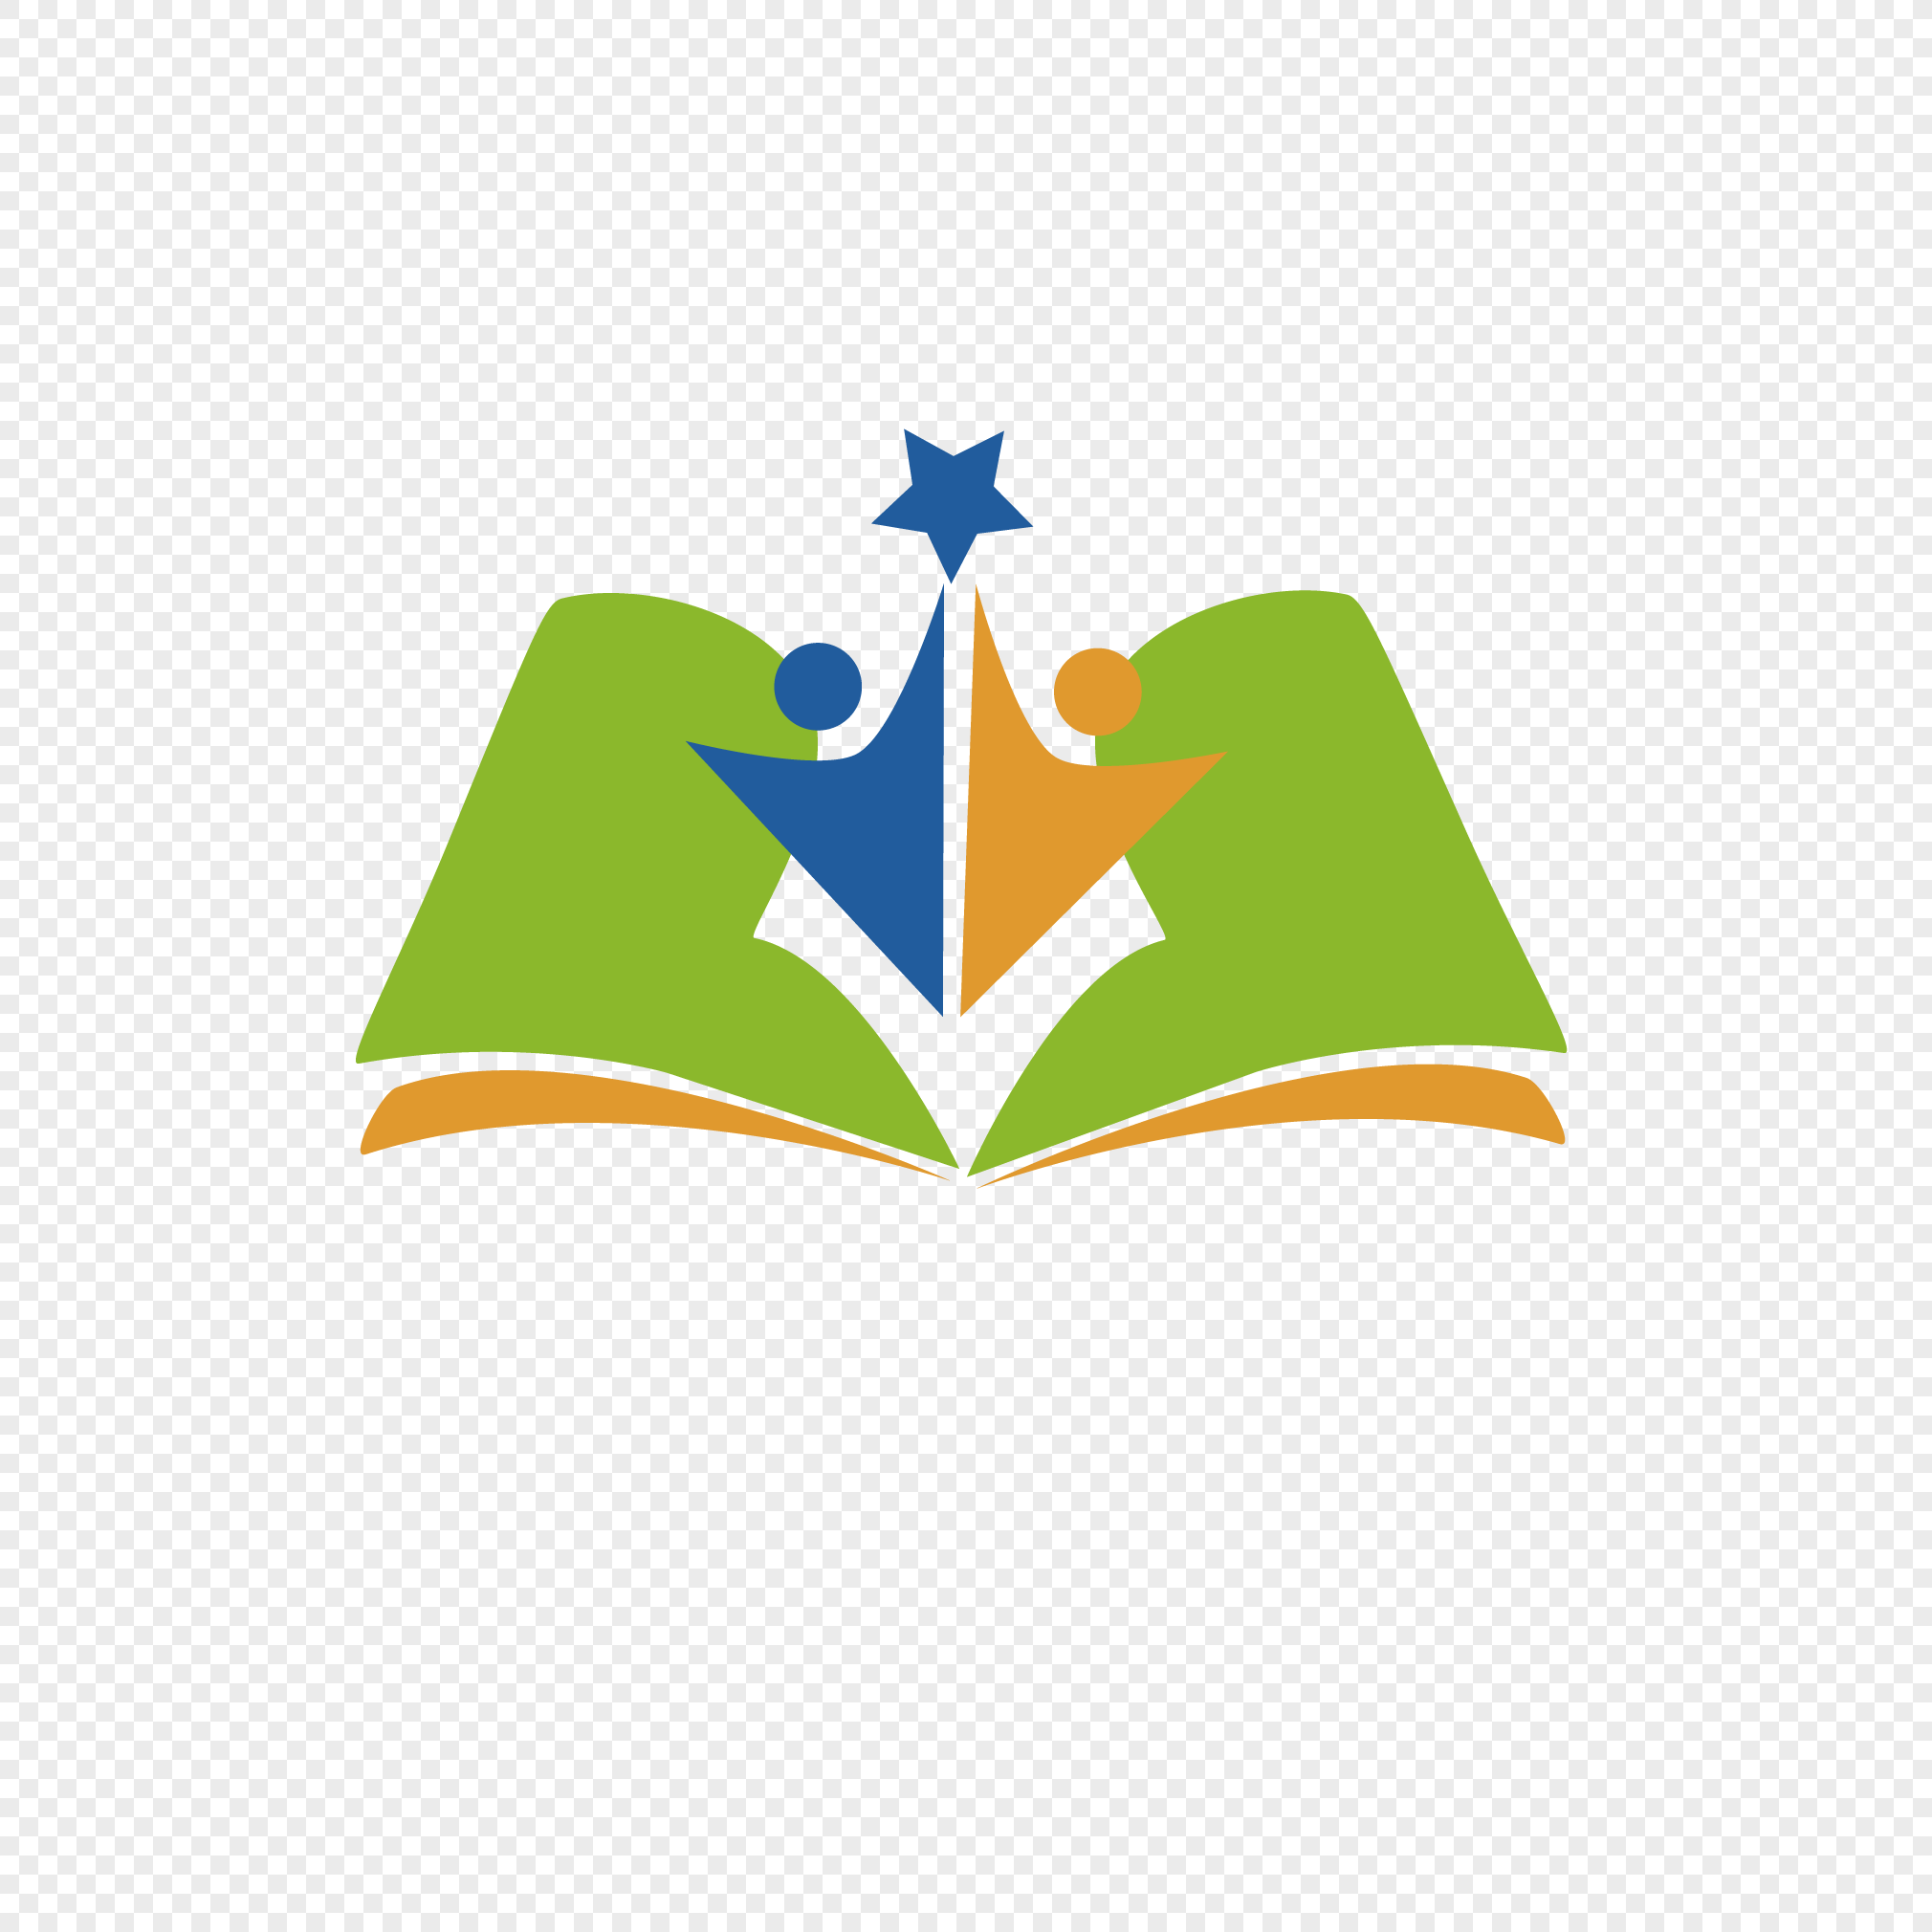 Free: Vector Logo Design Free - Online Education Logo Png - nohat.cc